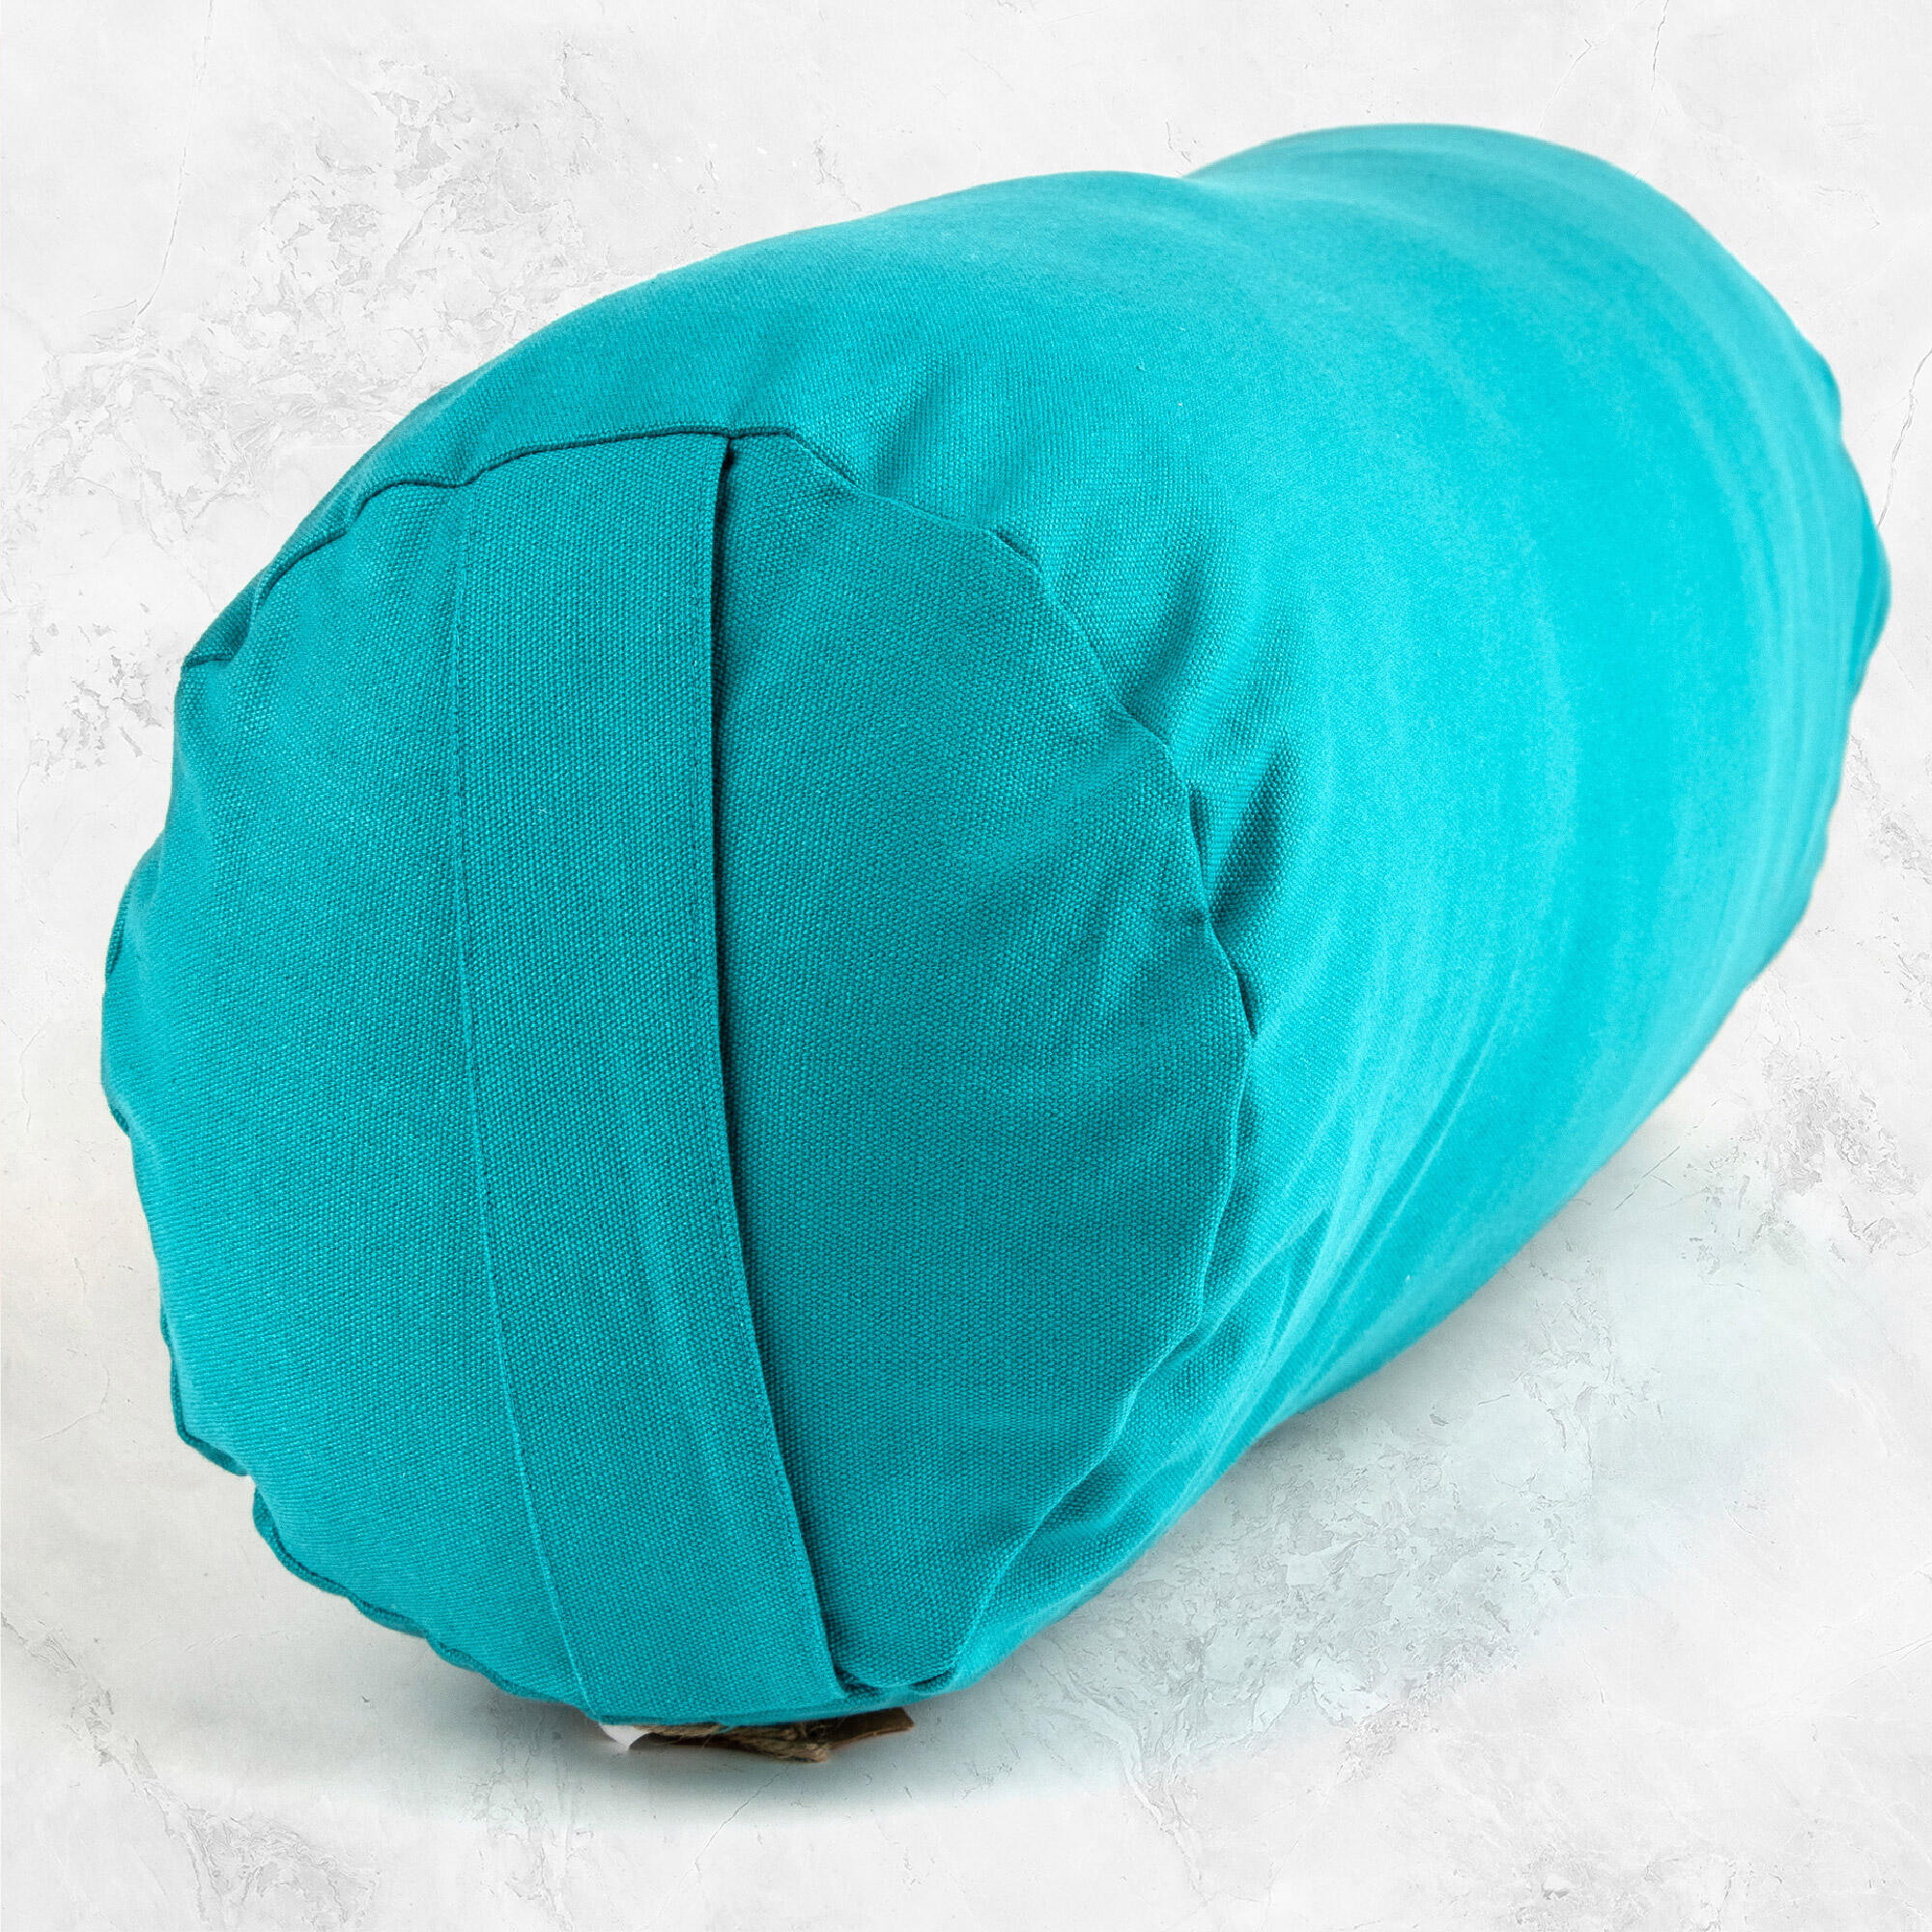 Myga Support Bolster Pillow - Turquoise 3/8